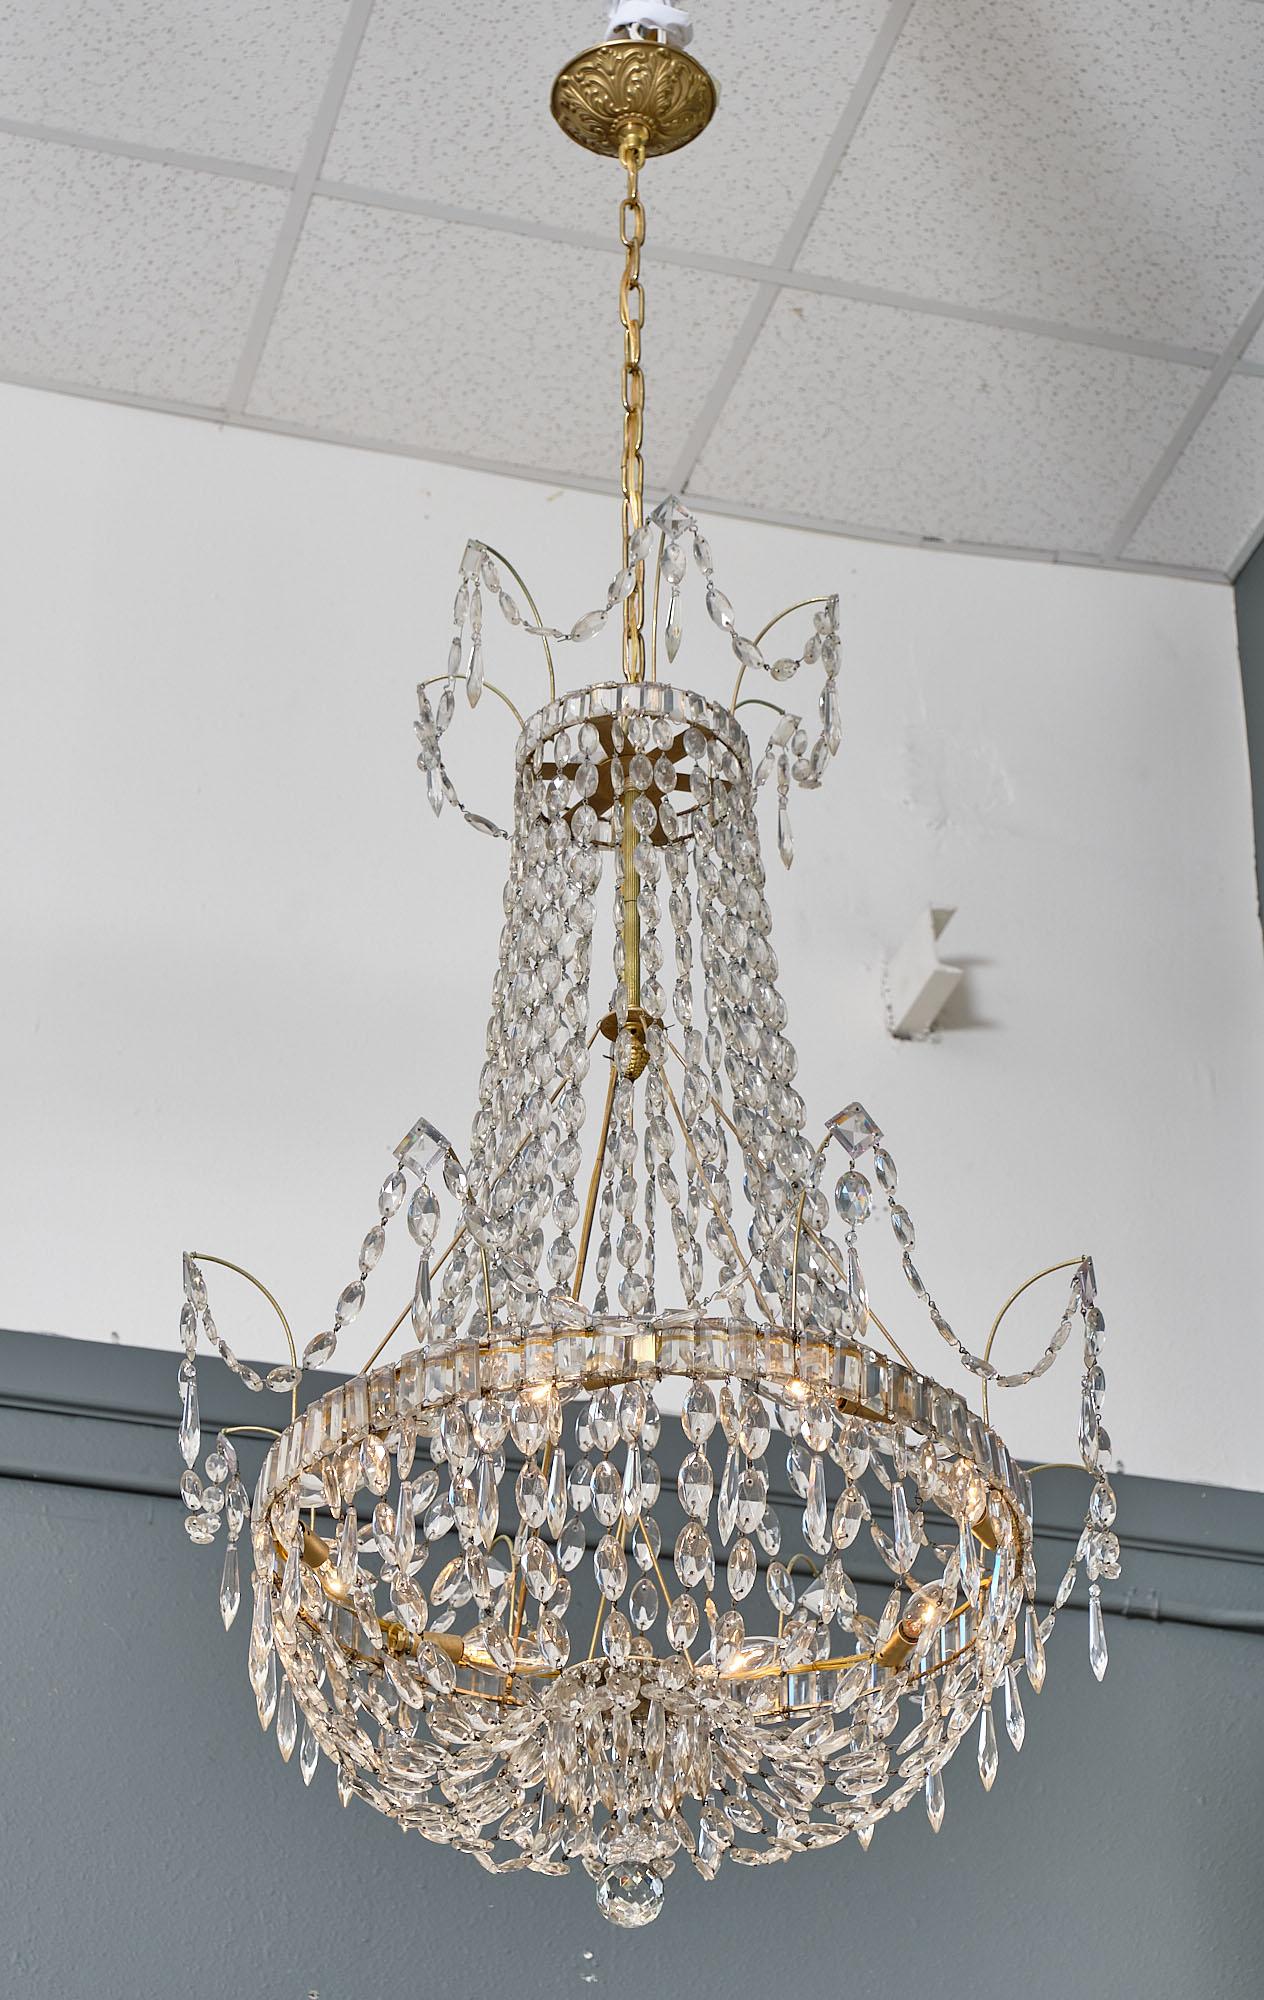 Pair of chandeliers from France. This rare pair of fixtures feature multiple cut crystal strands and pendants. Wired to fit US standards.